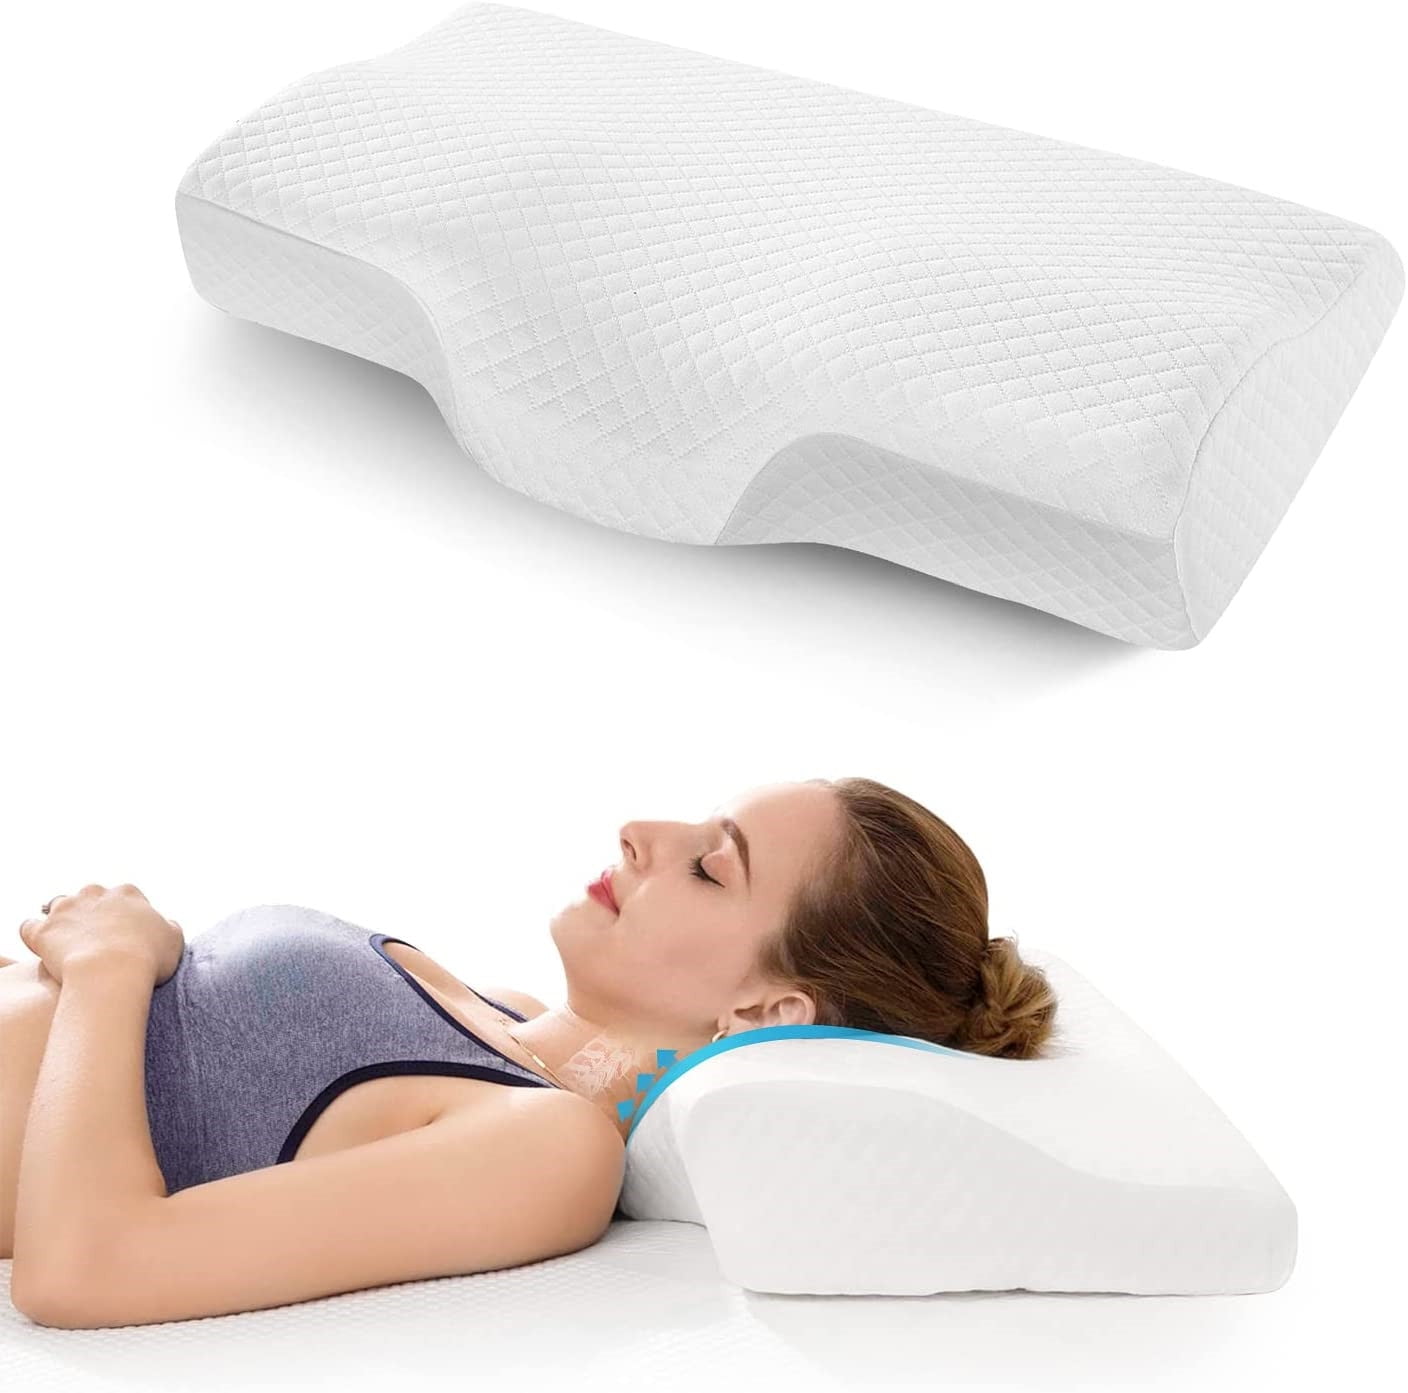 CONTOUR MEMORY FOAM PILLOW ORTHOPAEDIC FIRM HEAD NECK BACK SUPPORT PILLOWS CT1 